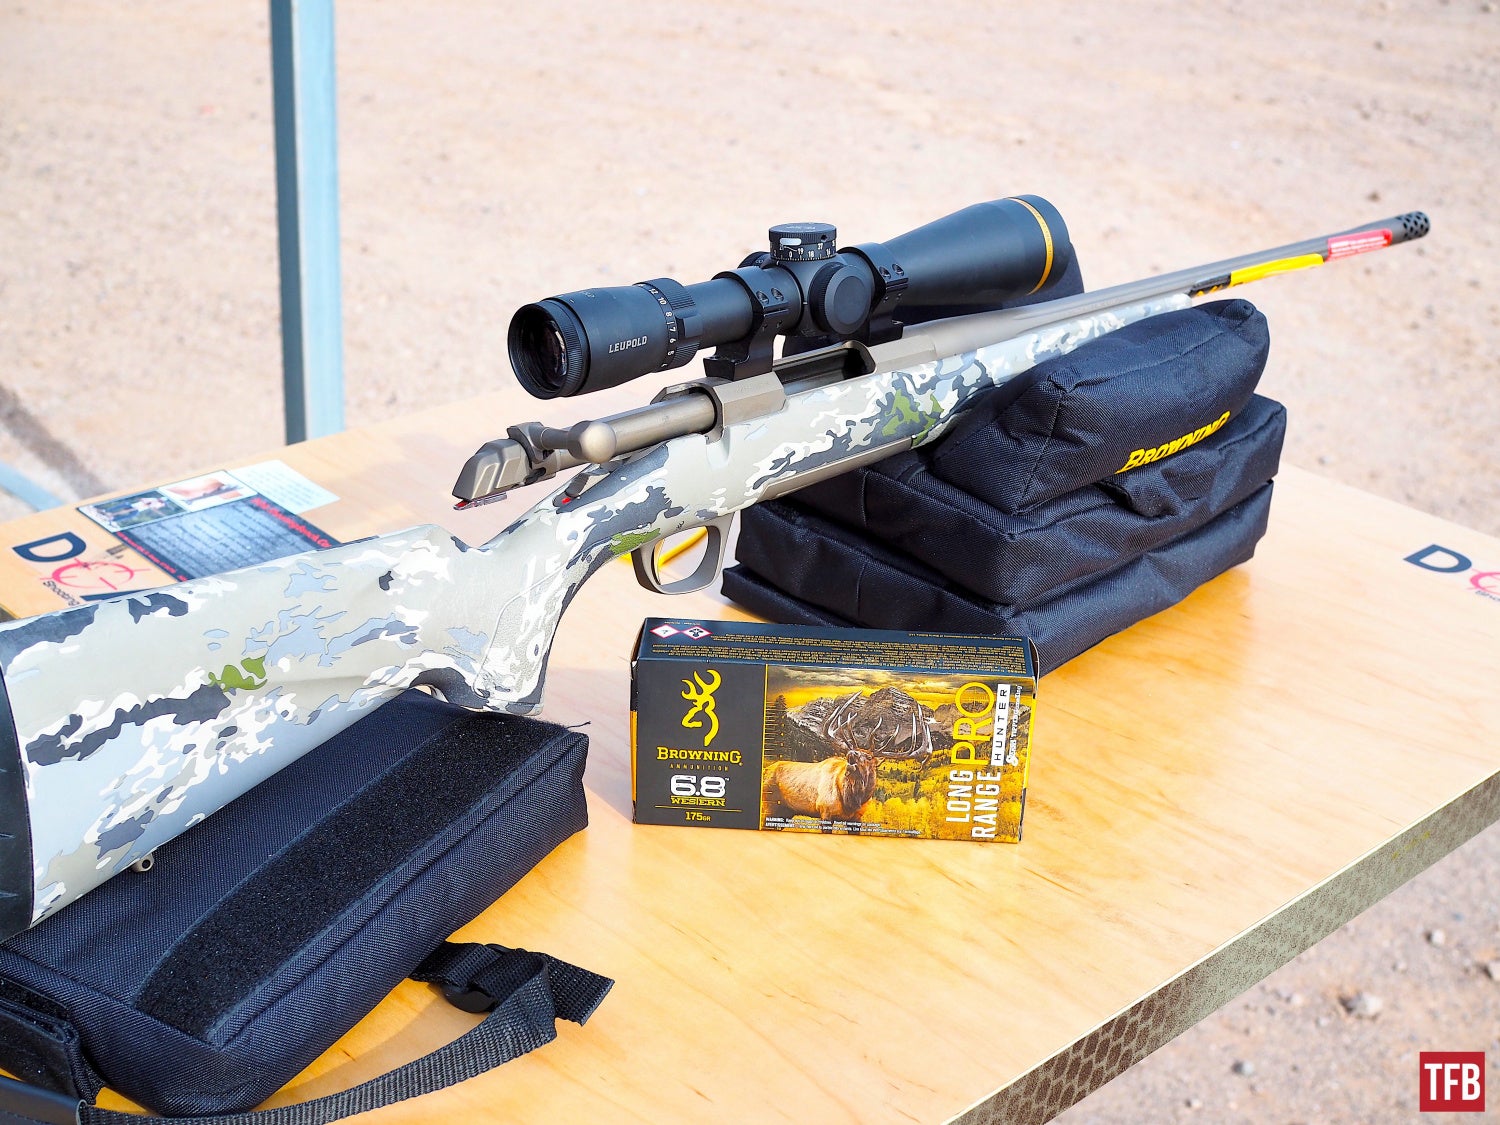 Also on hand to shoot was the X-Bolt Speed suppressor-ready rifle in 6.8 Western